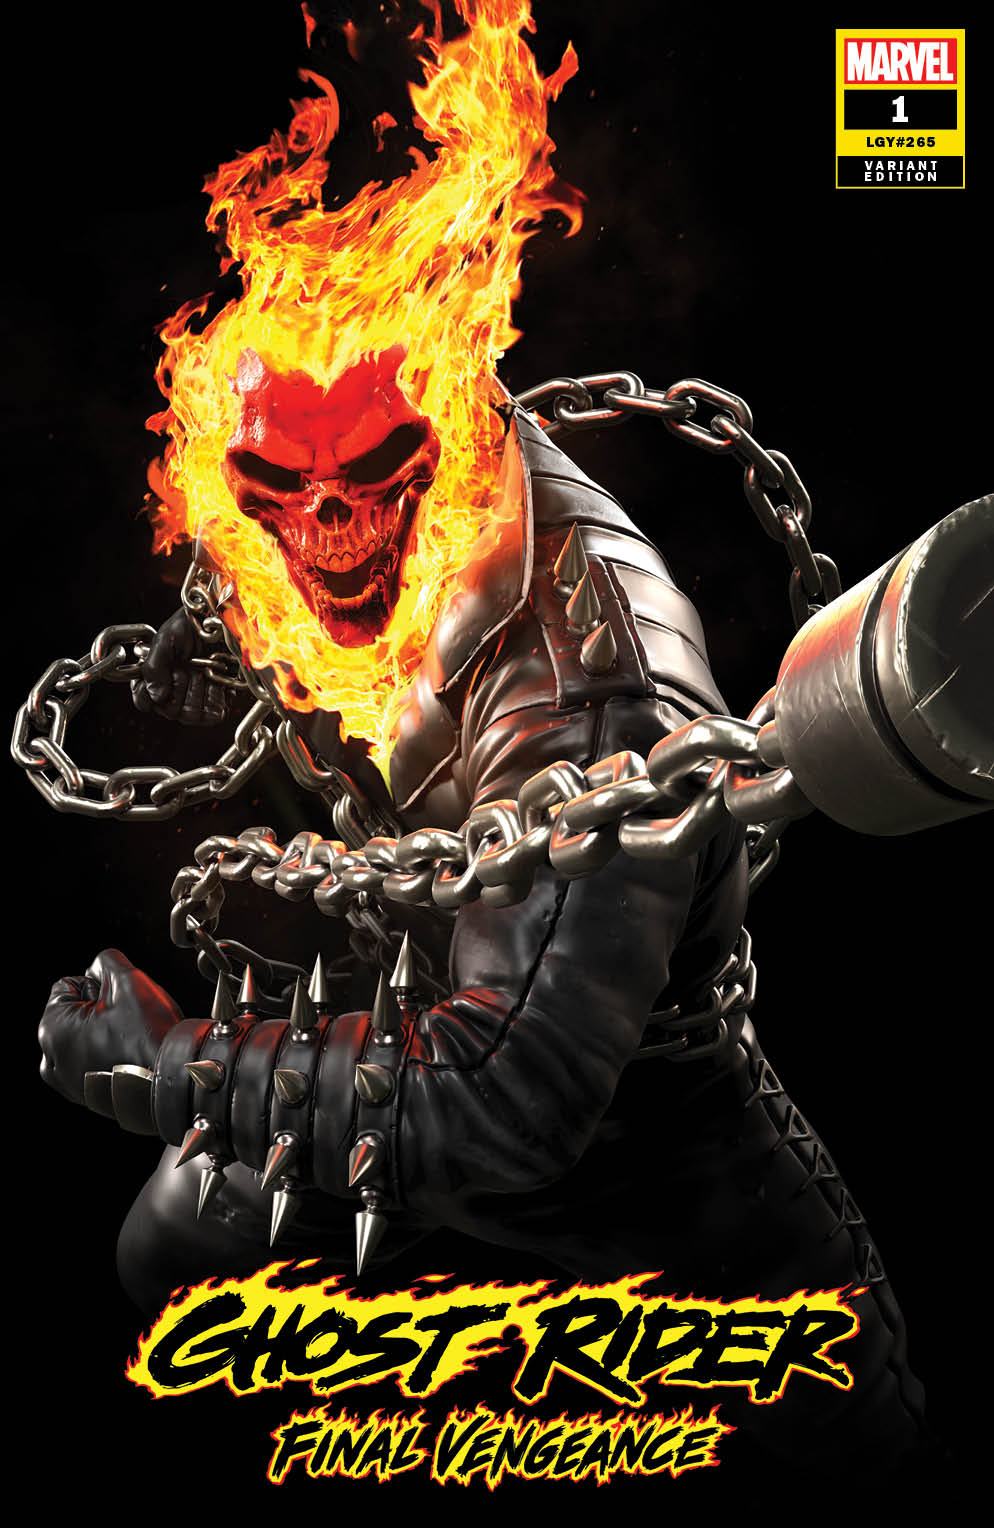 GHOST RIDER FINAL VENGEANCE #1 RAFAEL GRASSETTI VARIANT LIMITED TO 600 COPIES WITH NUMBERED COA